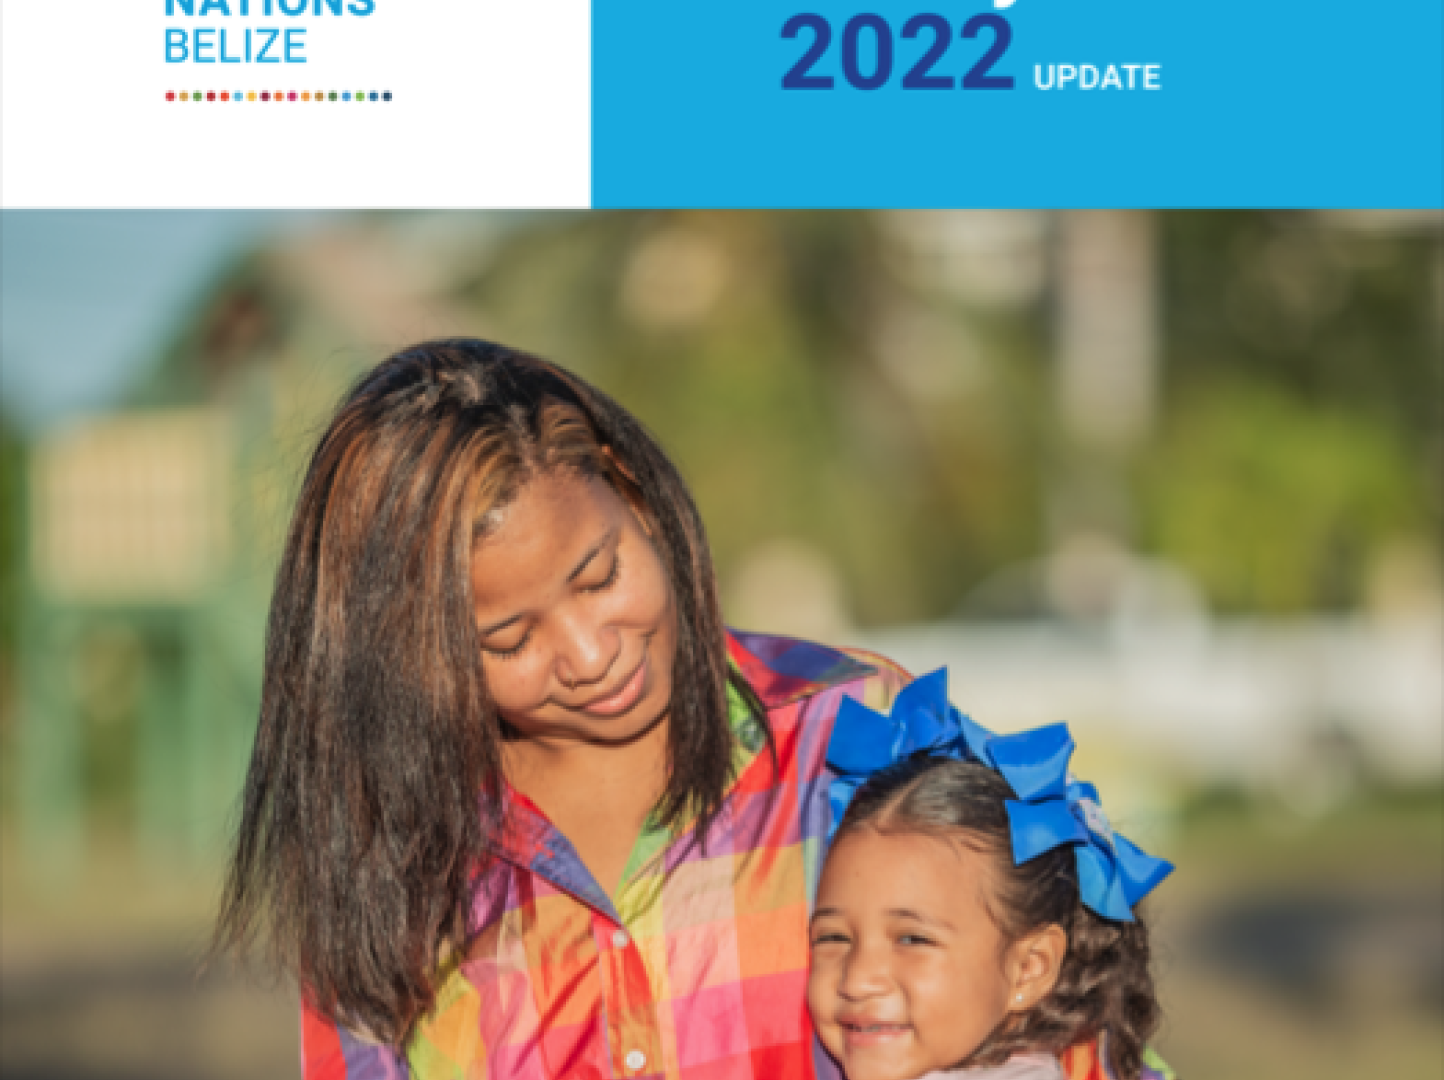 Common Country Analysis 2022 Update – UN in Belize